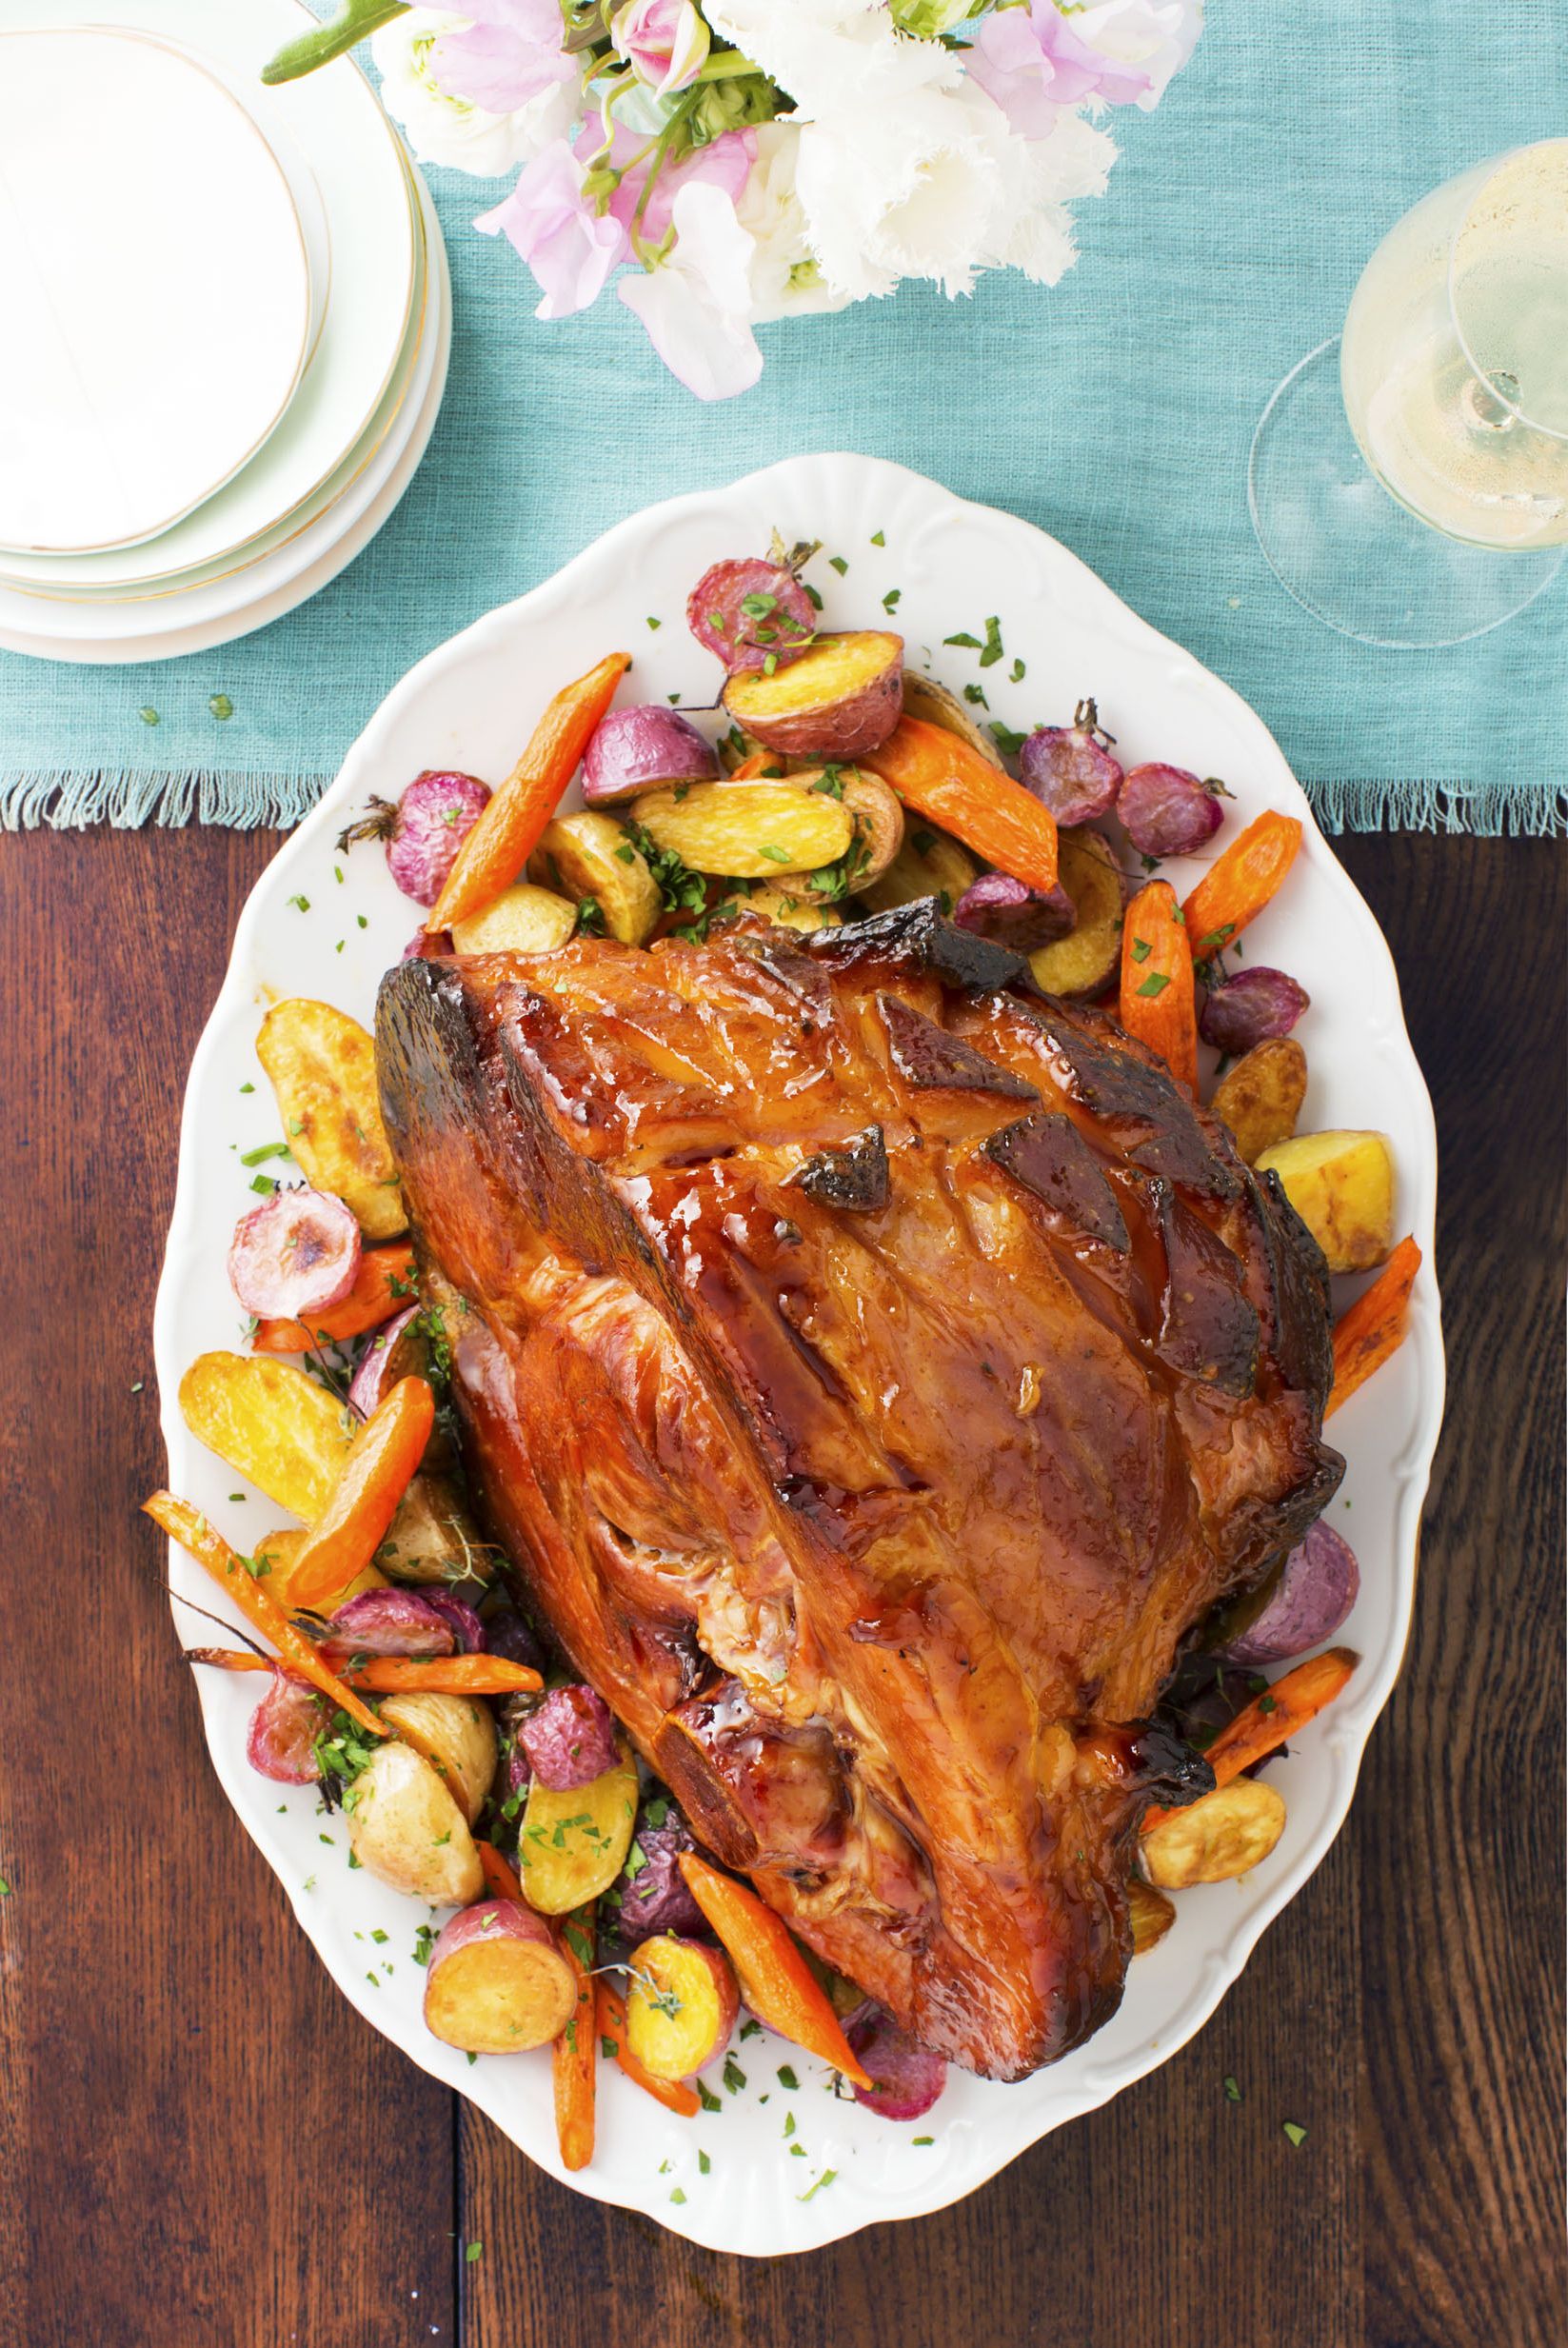 23 Déc. 2020 — List Of Easy And Delicious Recipes Ideas For Christmas Day Dinner Side Dish. Share This: Glazed Roast Ham With Cloves,Sparkling Wine And ... - 23 Déc. 2020 — List Of Easy And Delicious Recipes Ideas ...